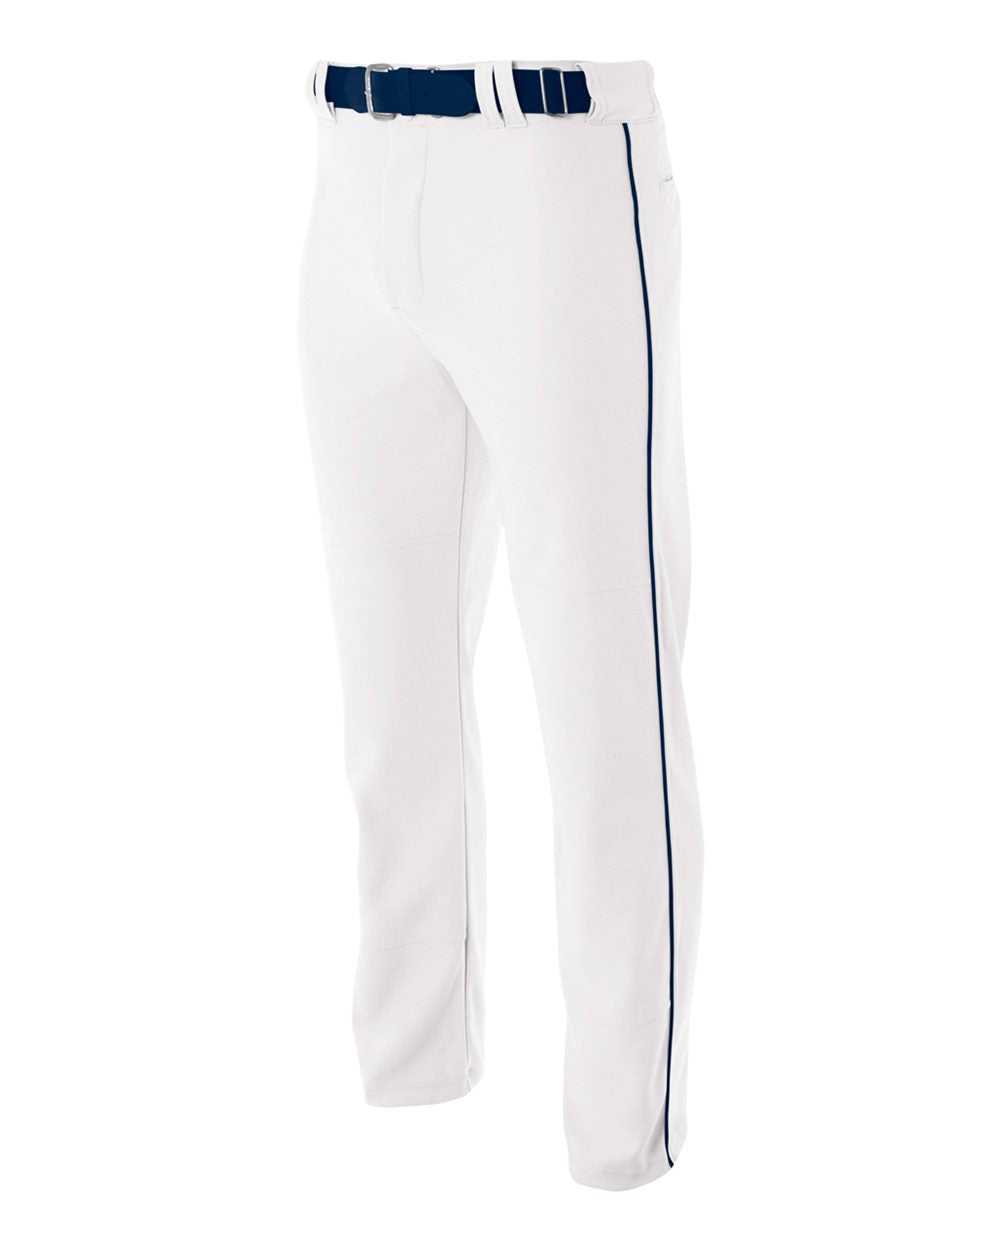 A4 N6162 Pro Style Open Bottom Baggy Cut Baseball Pant - White Navy - HIT a Double